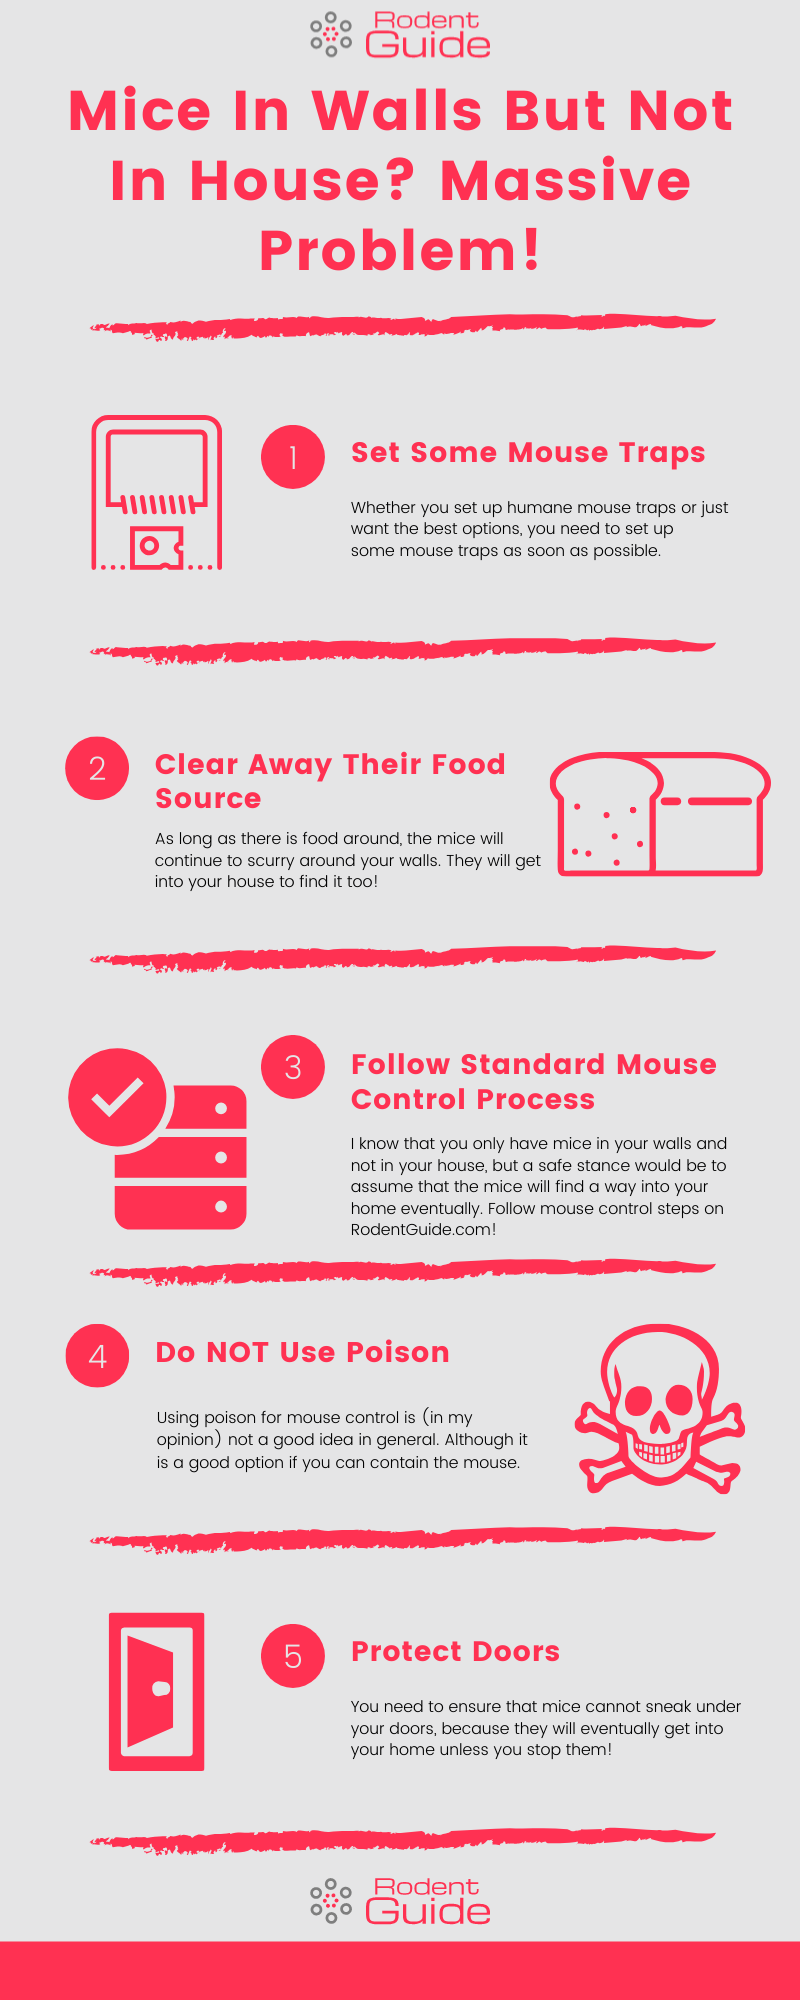 Mice In Walls But Not In House_ Massive Problem! Infographic